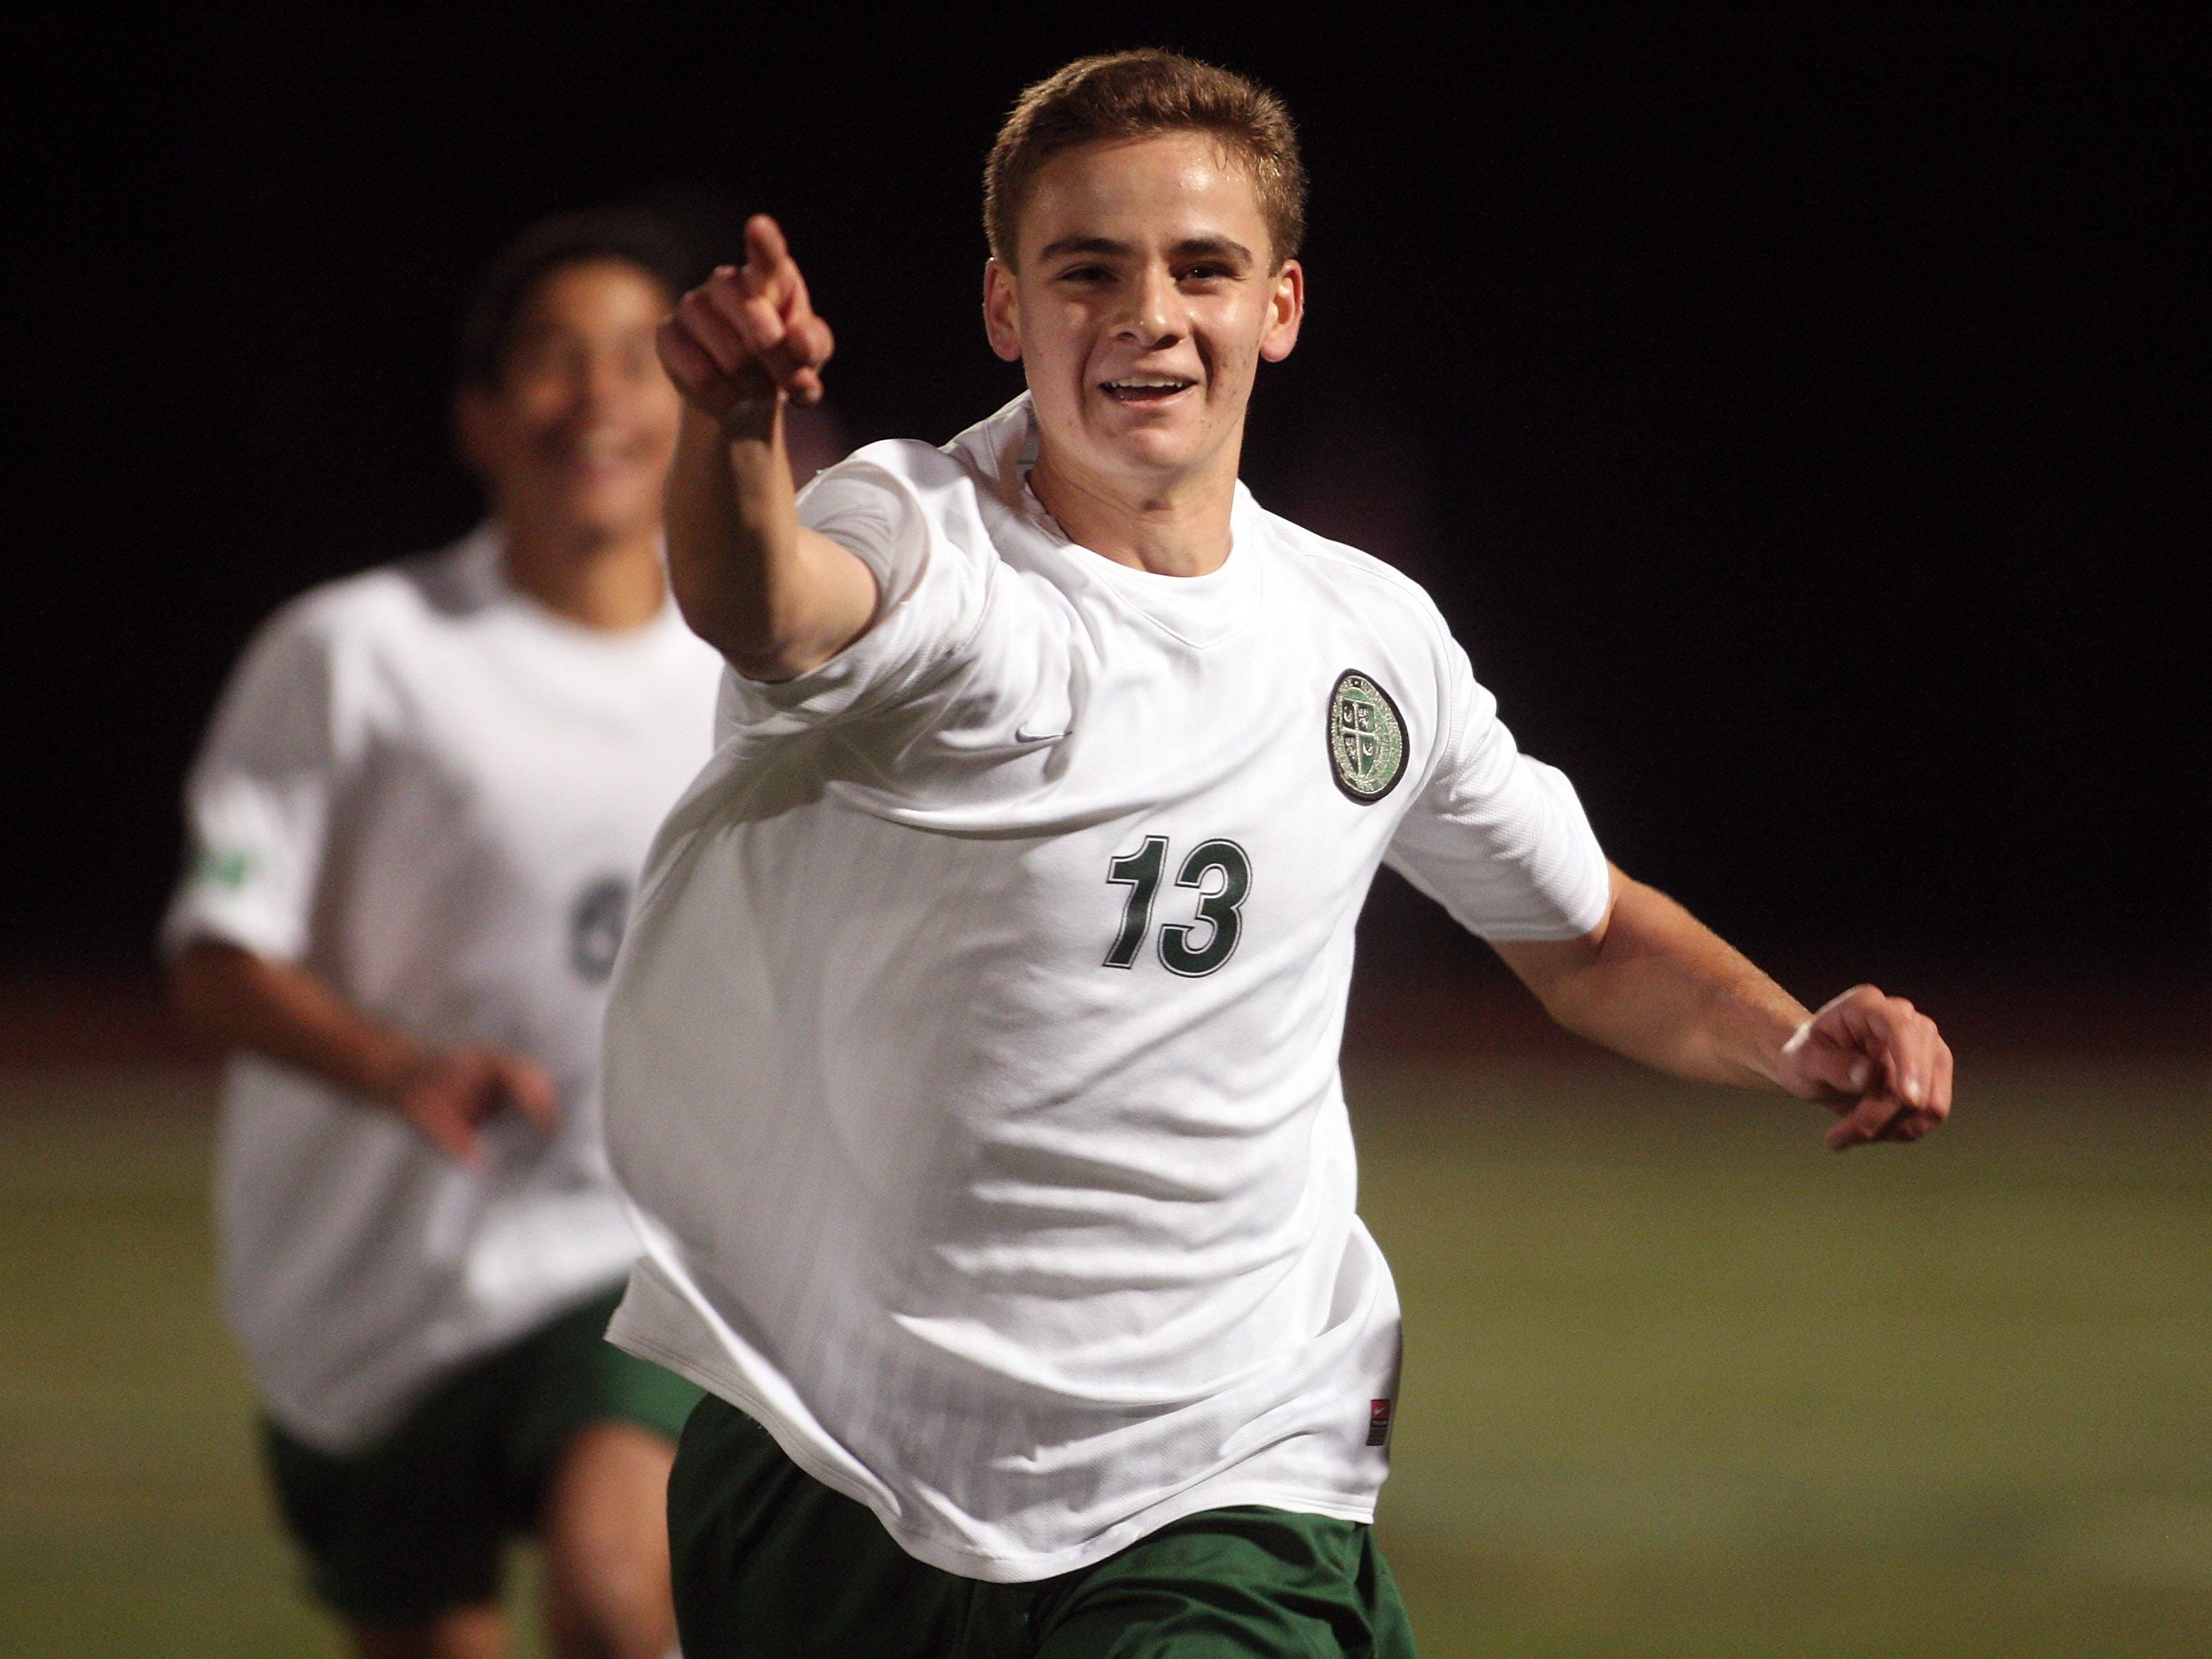 Steven Hadley points to the Delbarton fans after scoring in the Morris County Tournament boys soccer final last year.